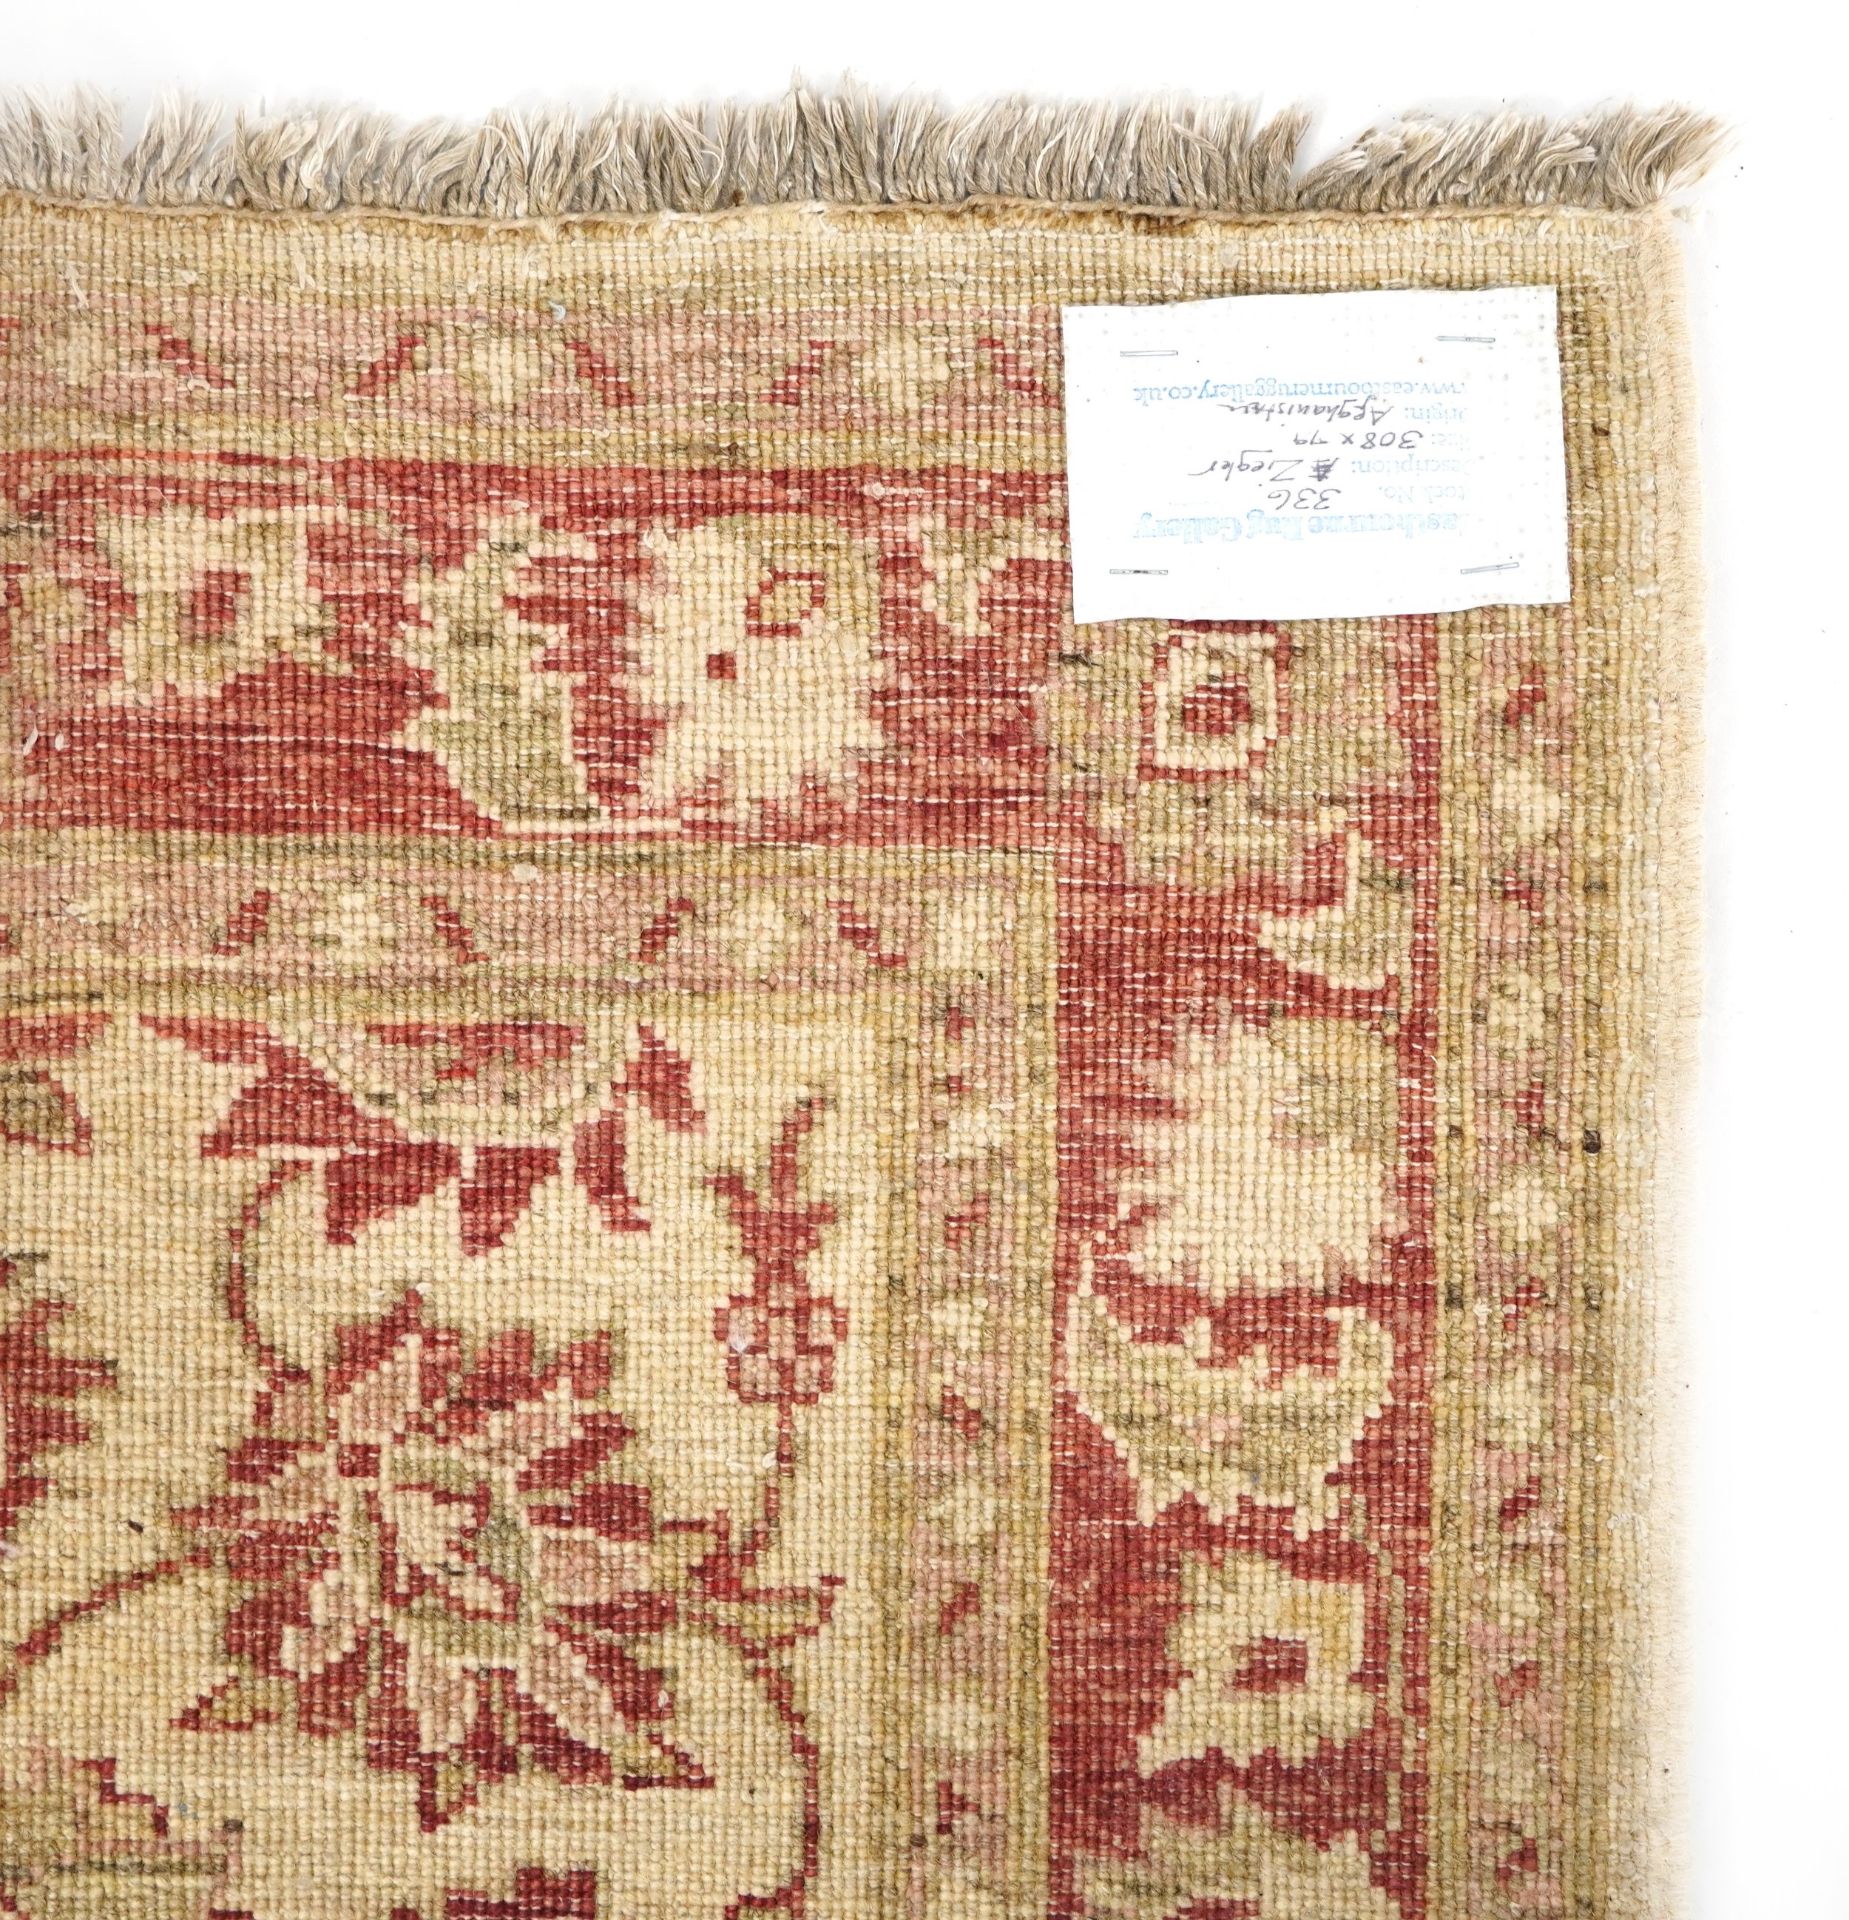 Afghan Ziegler cream and red ground carpet runner, 300cm x 78cm - Image 6 of 6